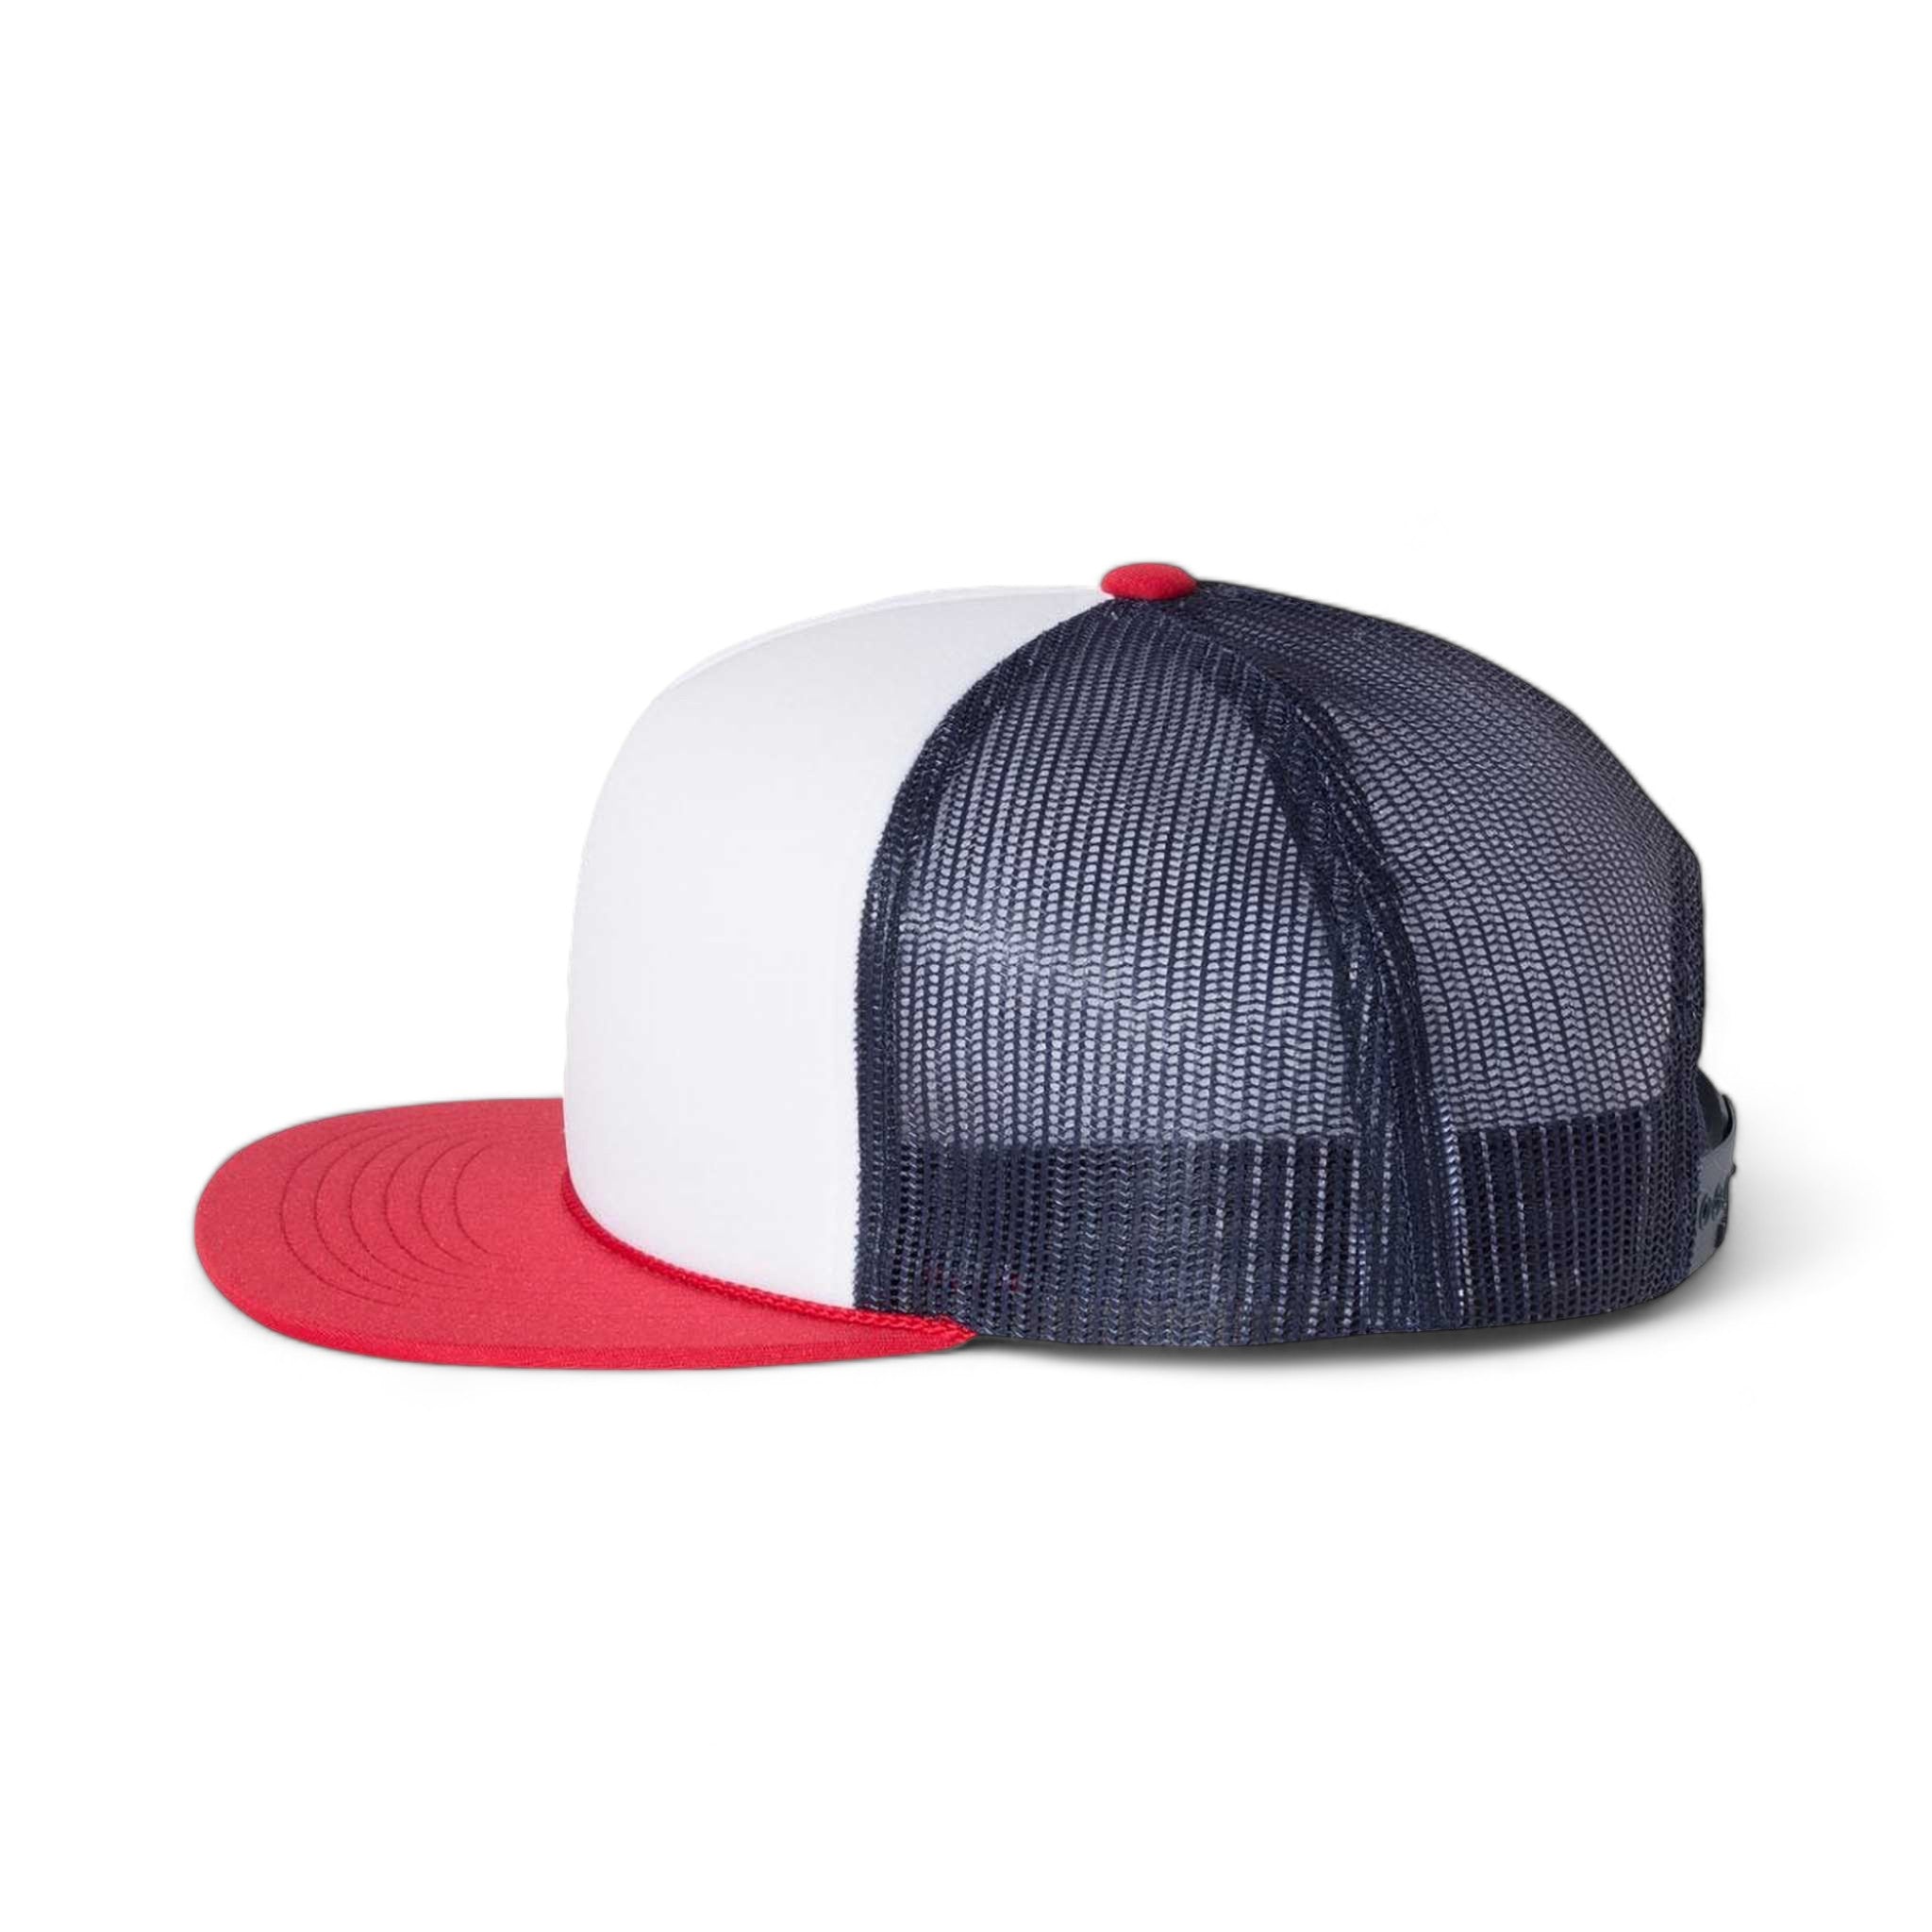 Side view of Richardson 113 custom hat in white, navy and red